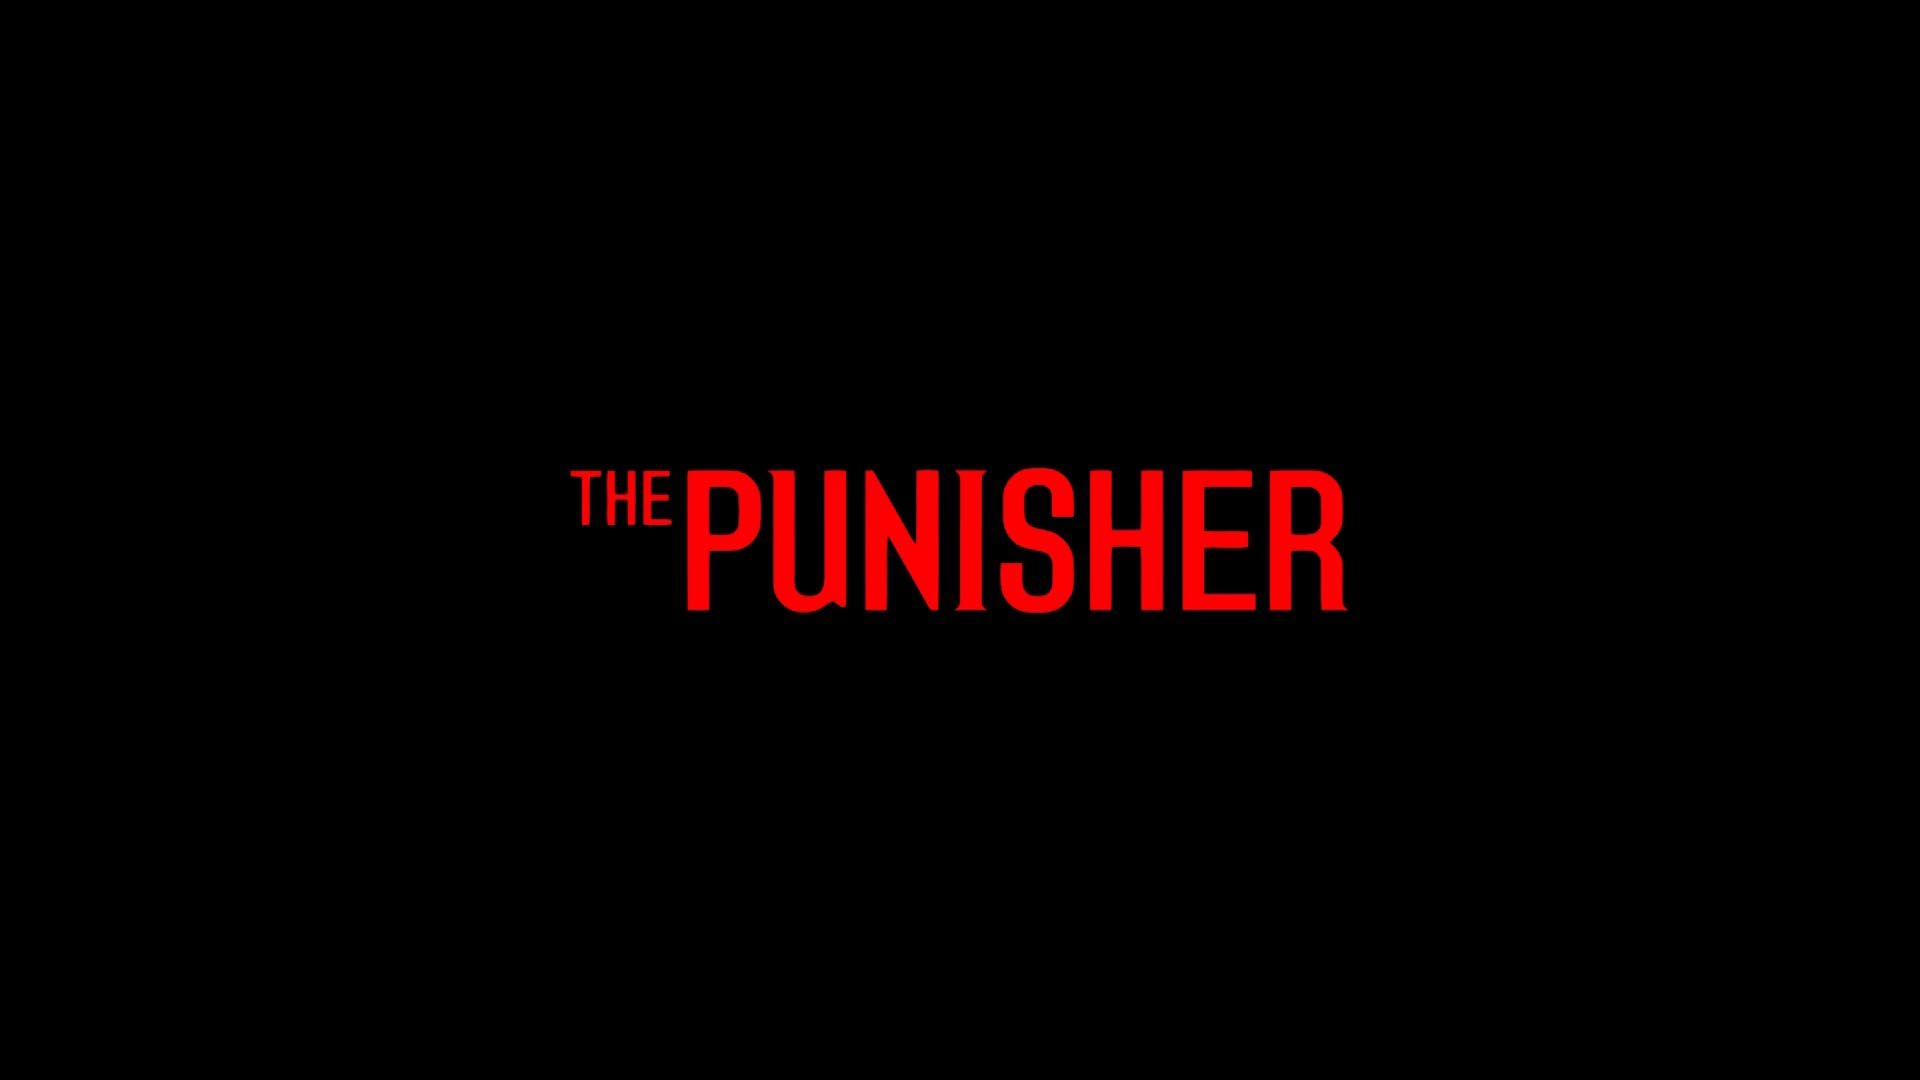 The Punisher: Dirty Laundry Lock Screen Wallpaper